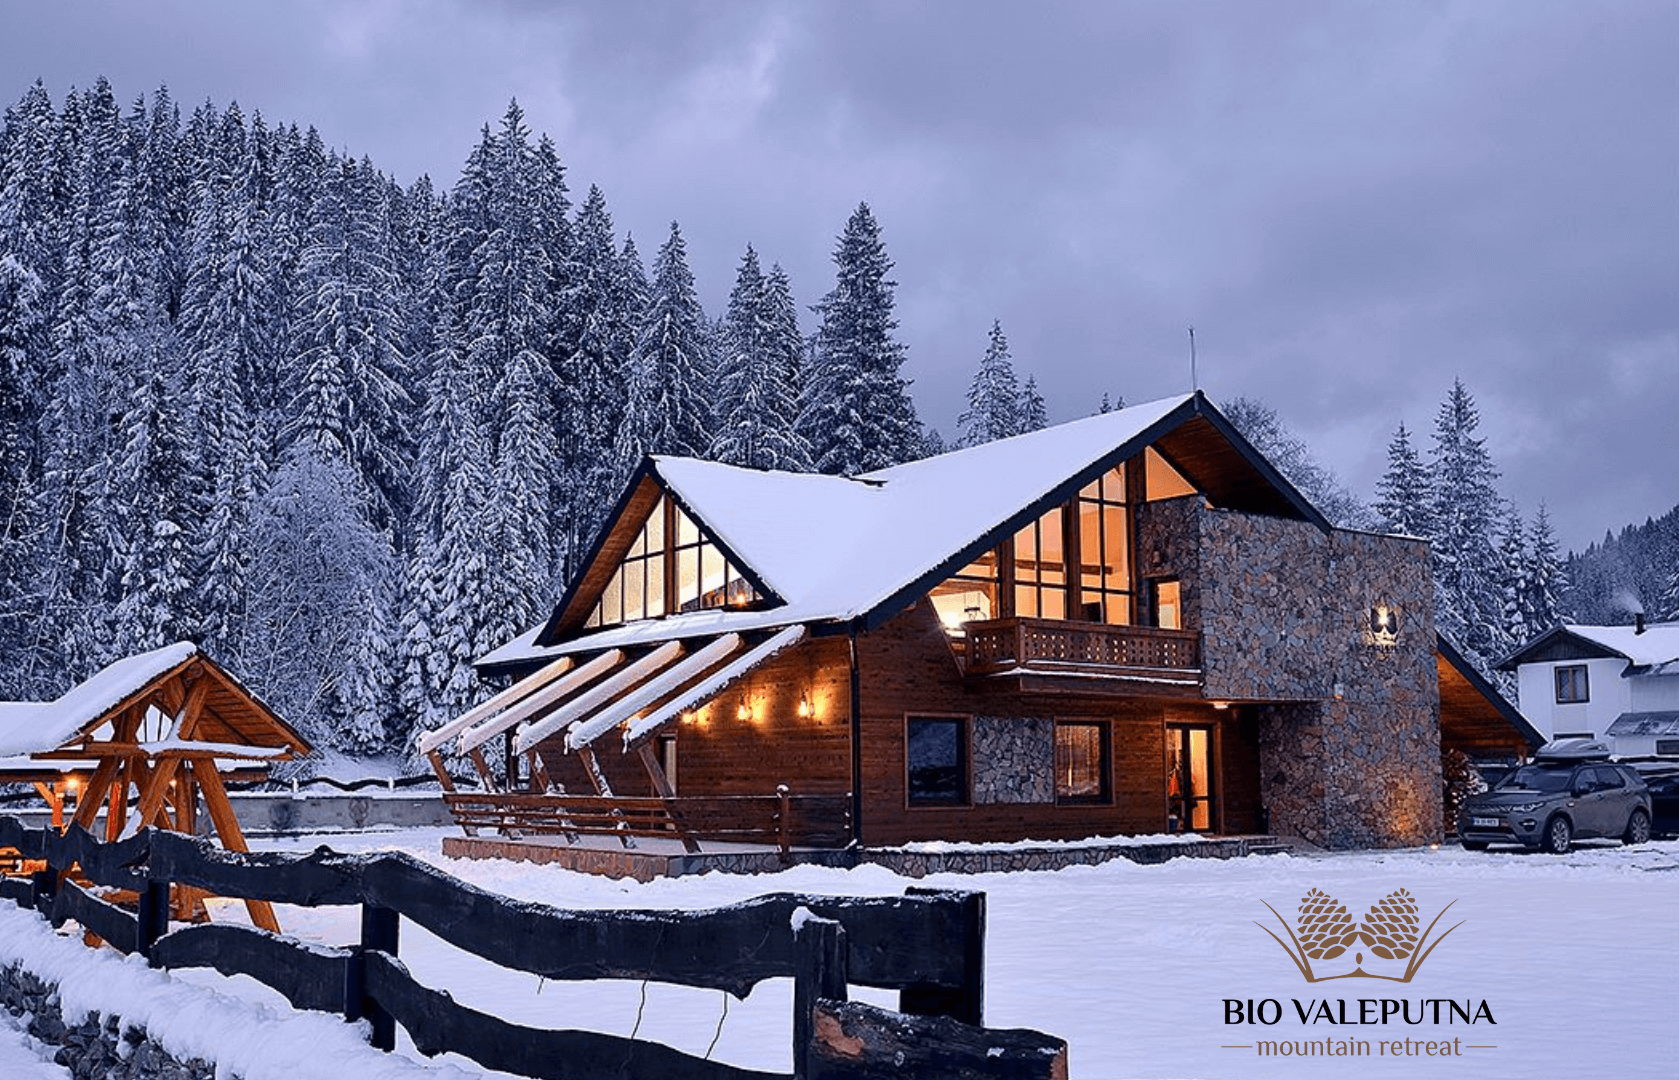 Snowy landscape and forest surrounding Biovaleputna guest house